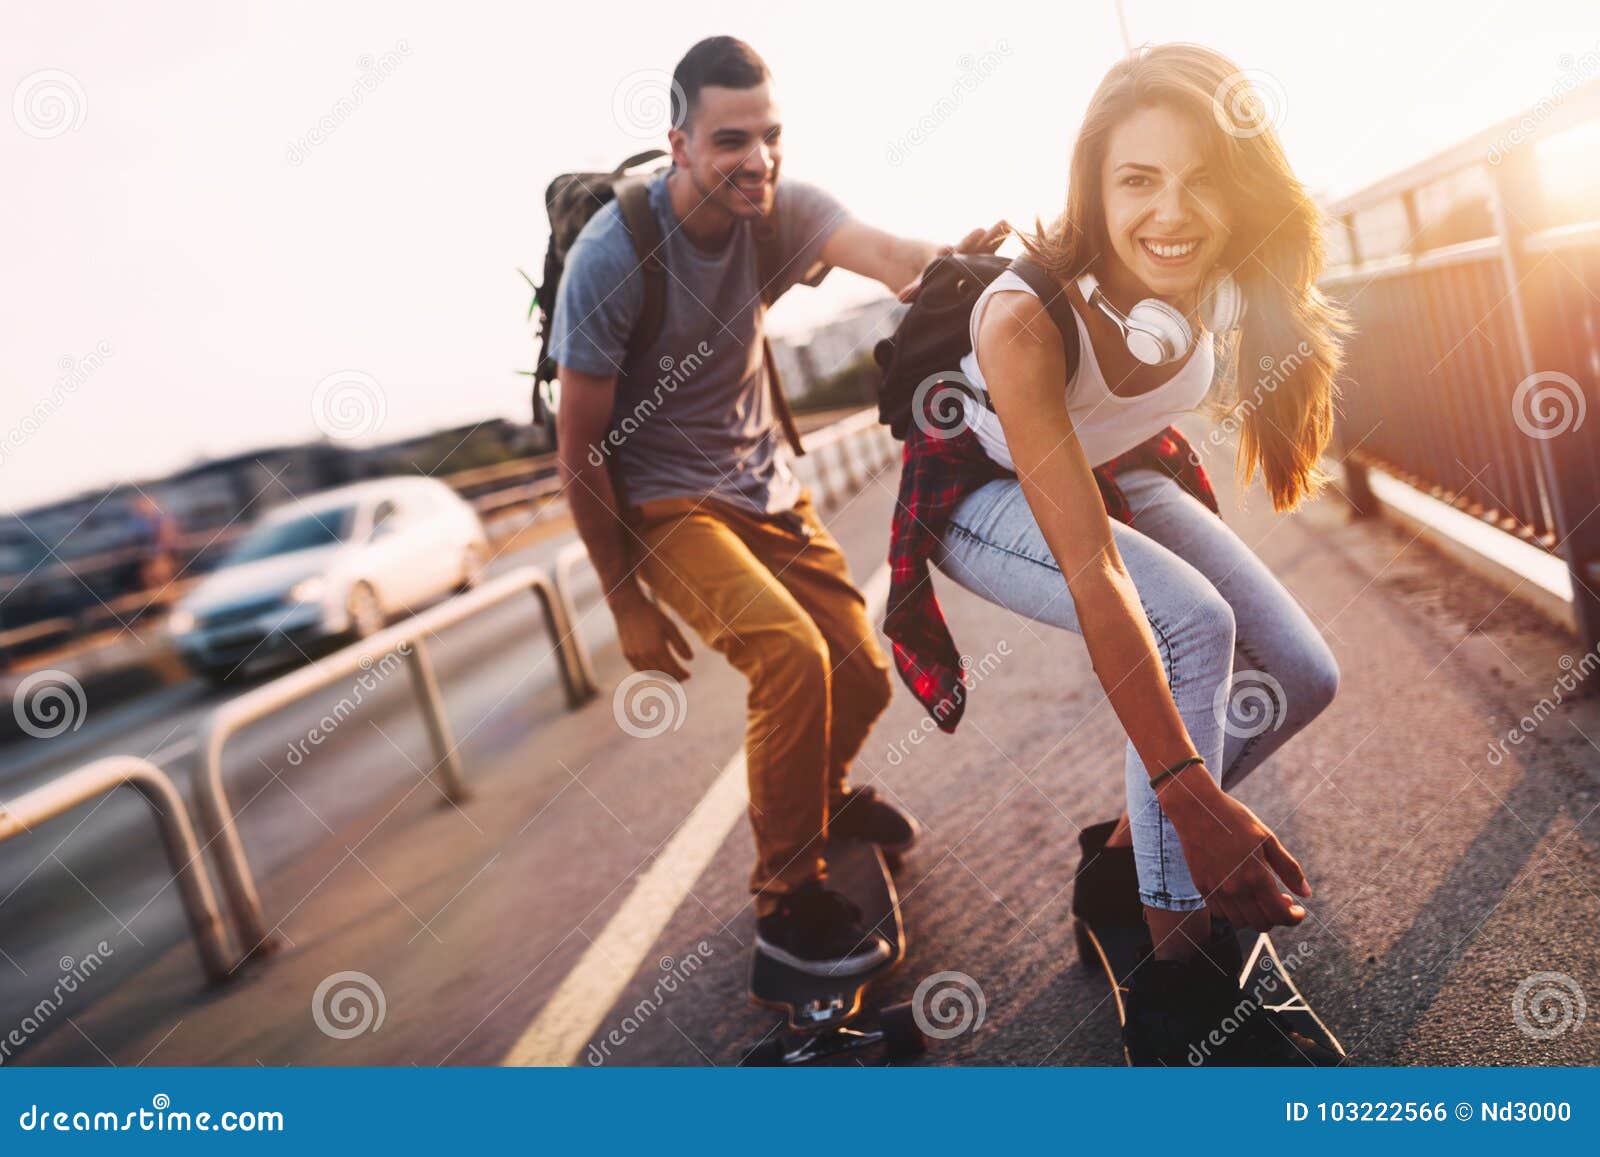 Young Attractive Couple Riding Skateboards And Having Fun